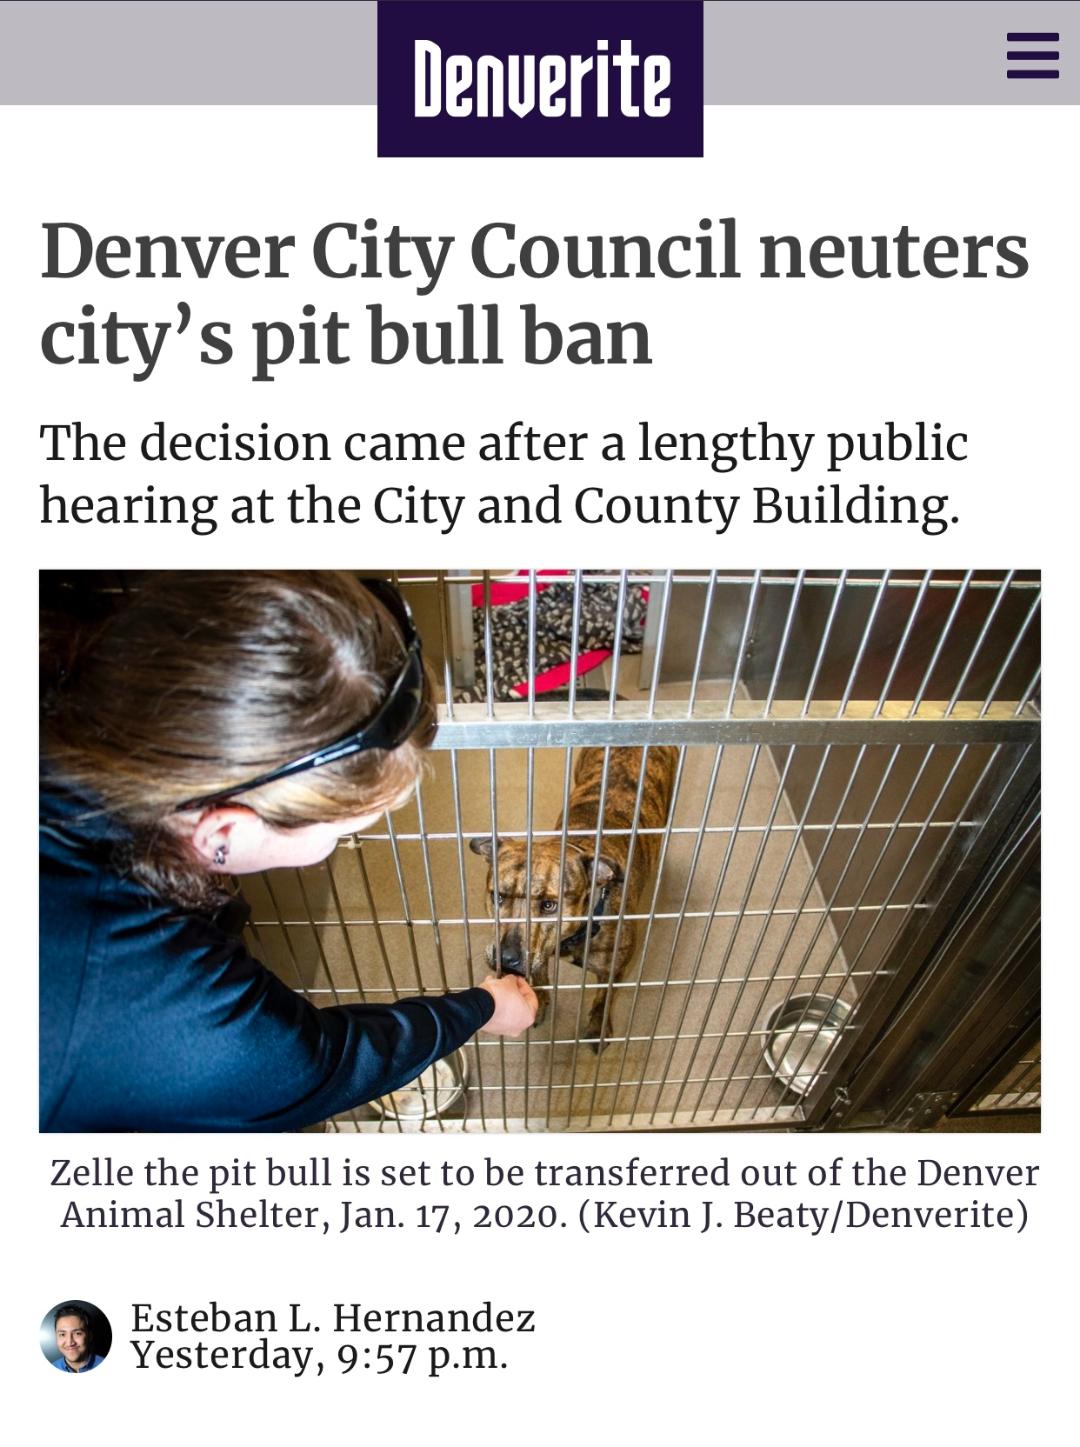 DENVER FINALLY ENDS 30 YEAR GENOCIDE AGAINST DOGS LABELED PIT BULLS